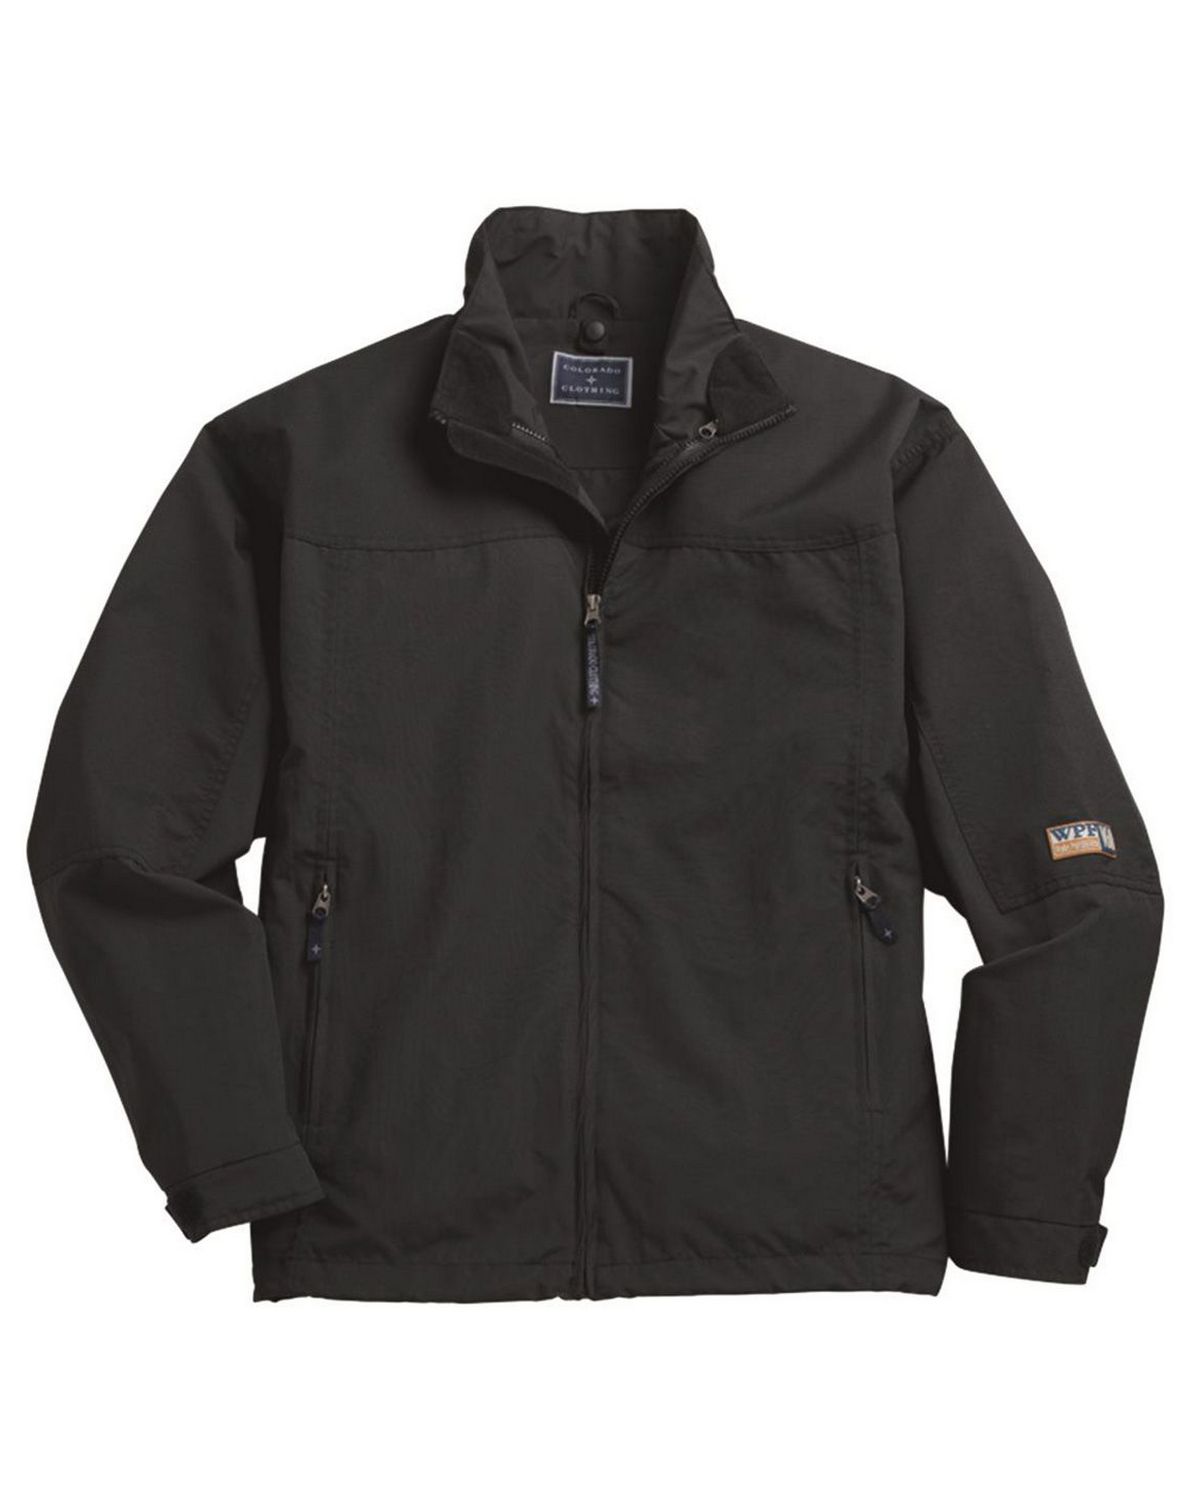 Colorado Clothing 13435O Mens 3-in-1 Systems Jacket Outer Shell